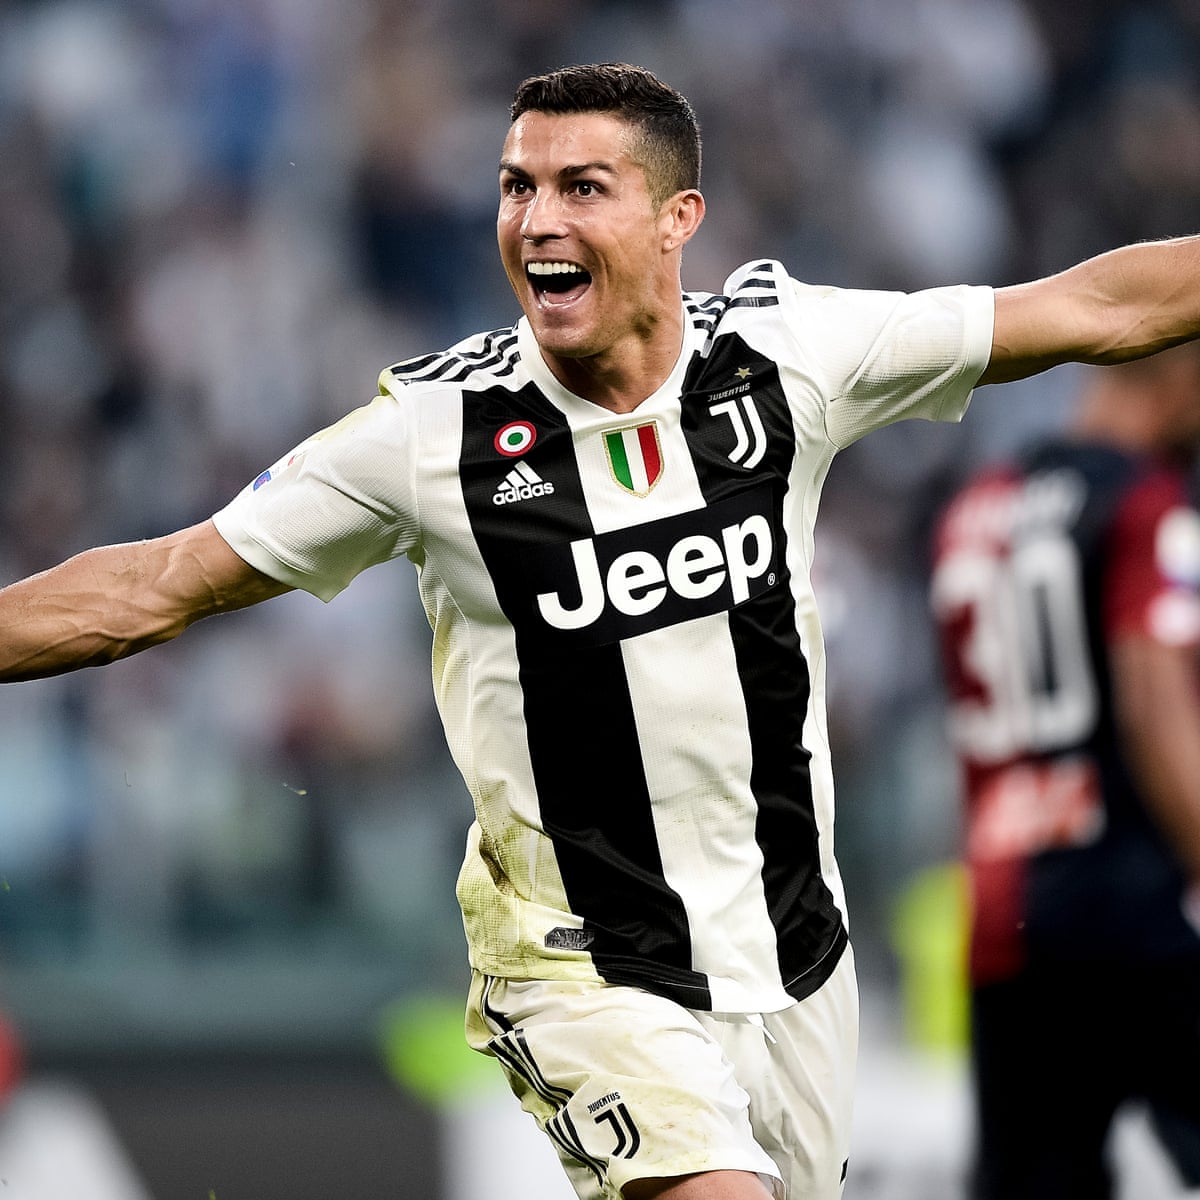 Juventus Cristiano Ronaldo Exit Left Club in relegation zone with worst start in 60 years!